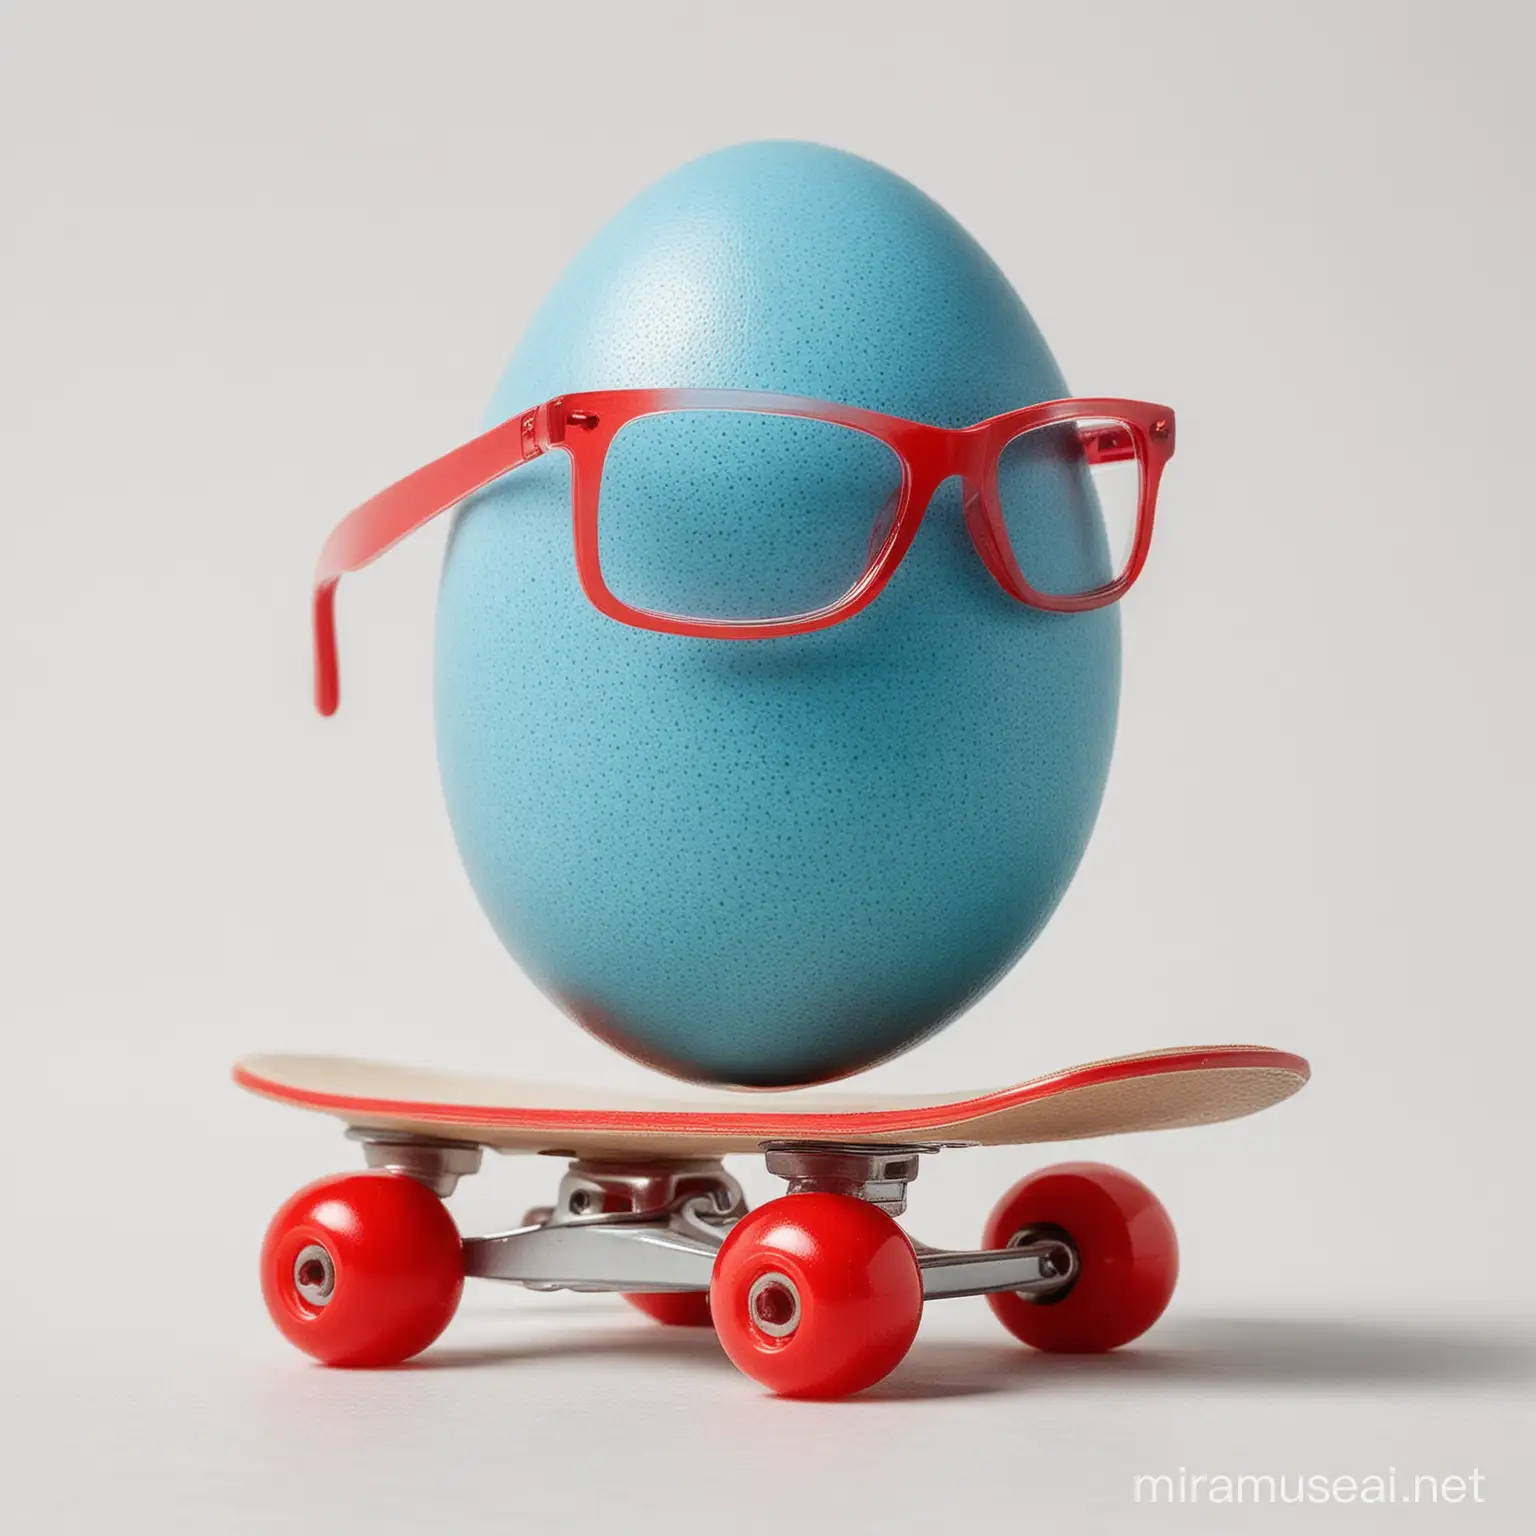 blue egg with red glasses frame (egg must be in vertical position), on a skateboard, white background